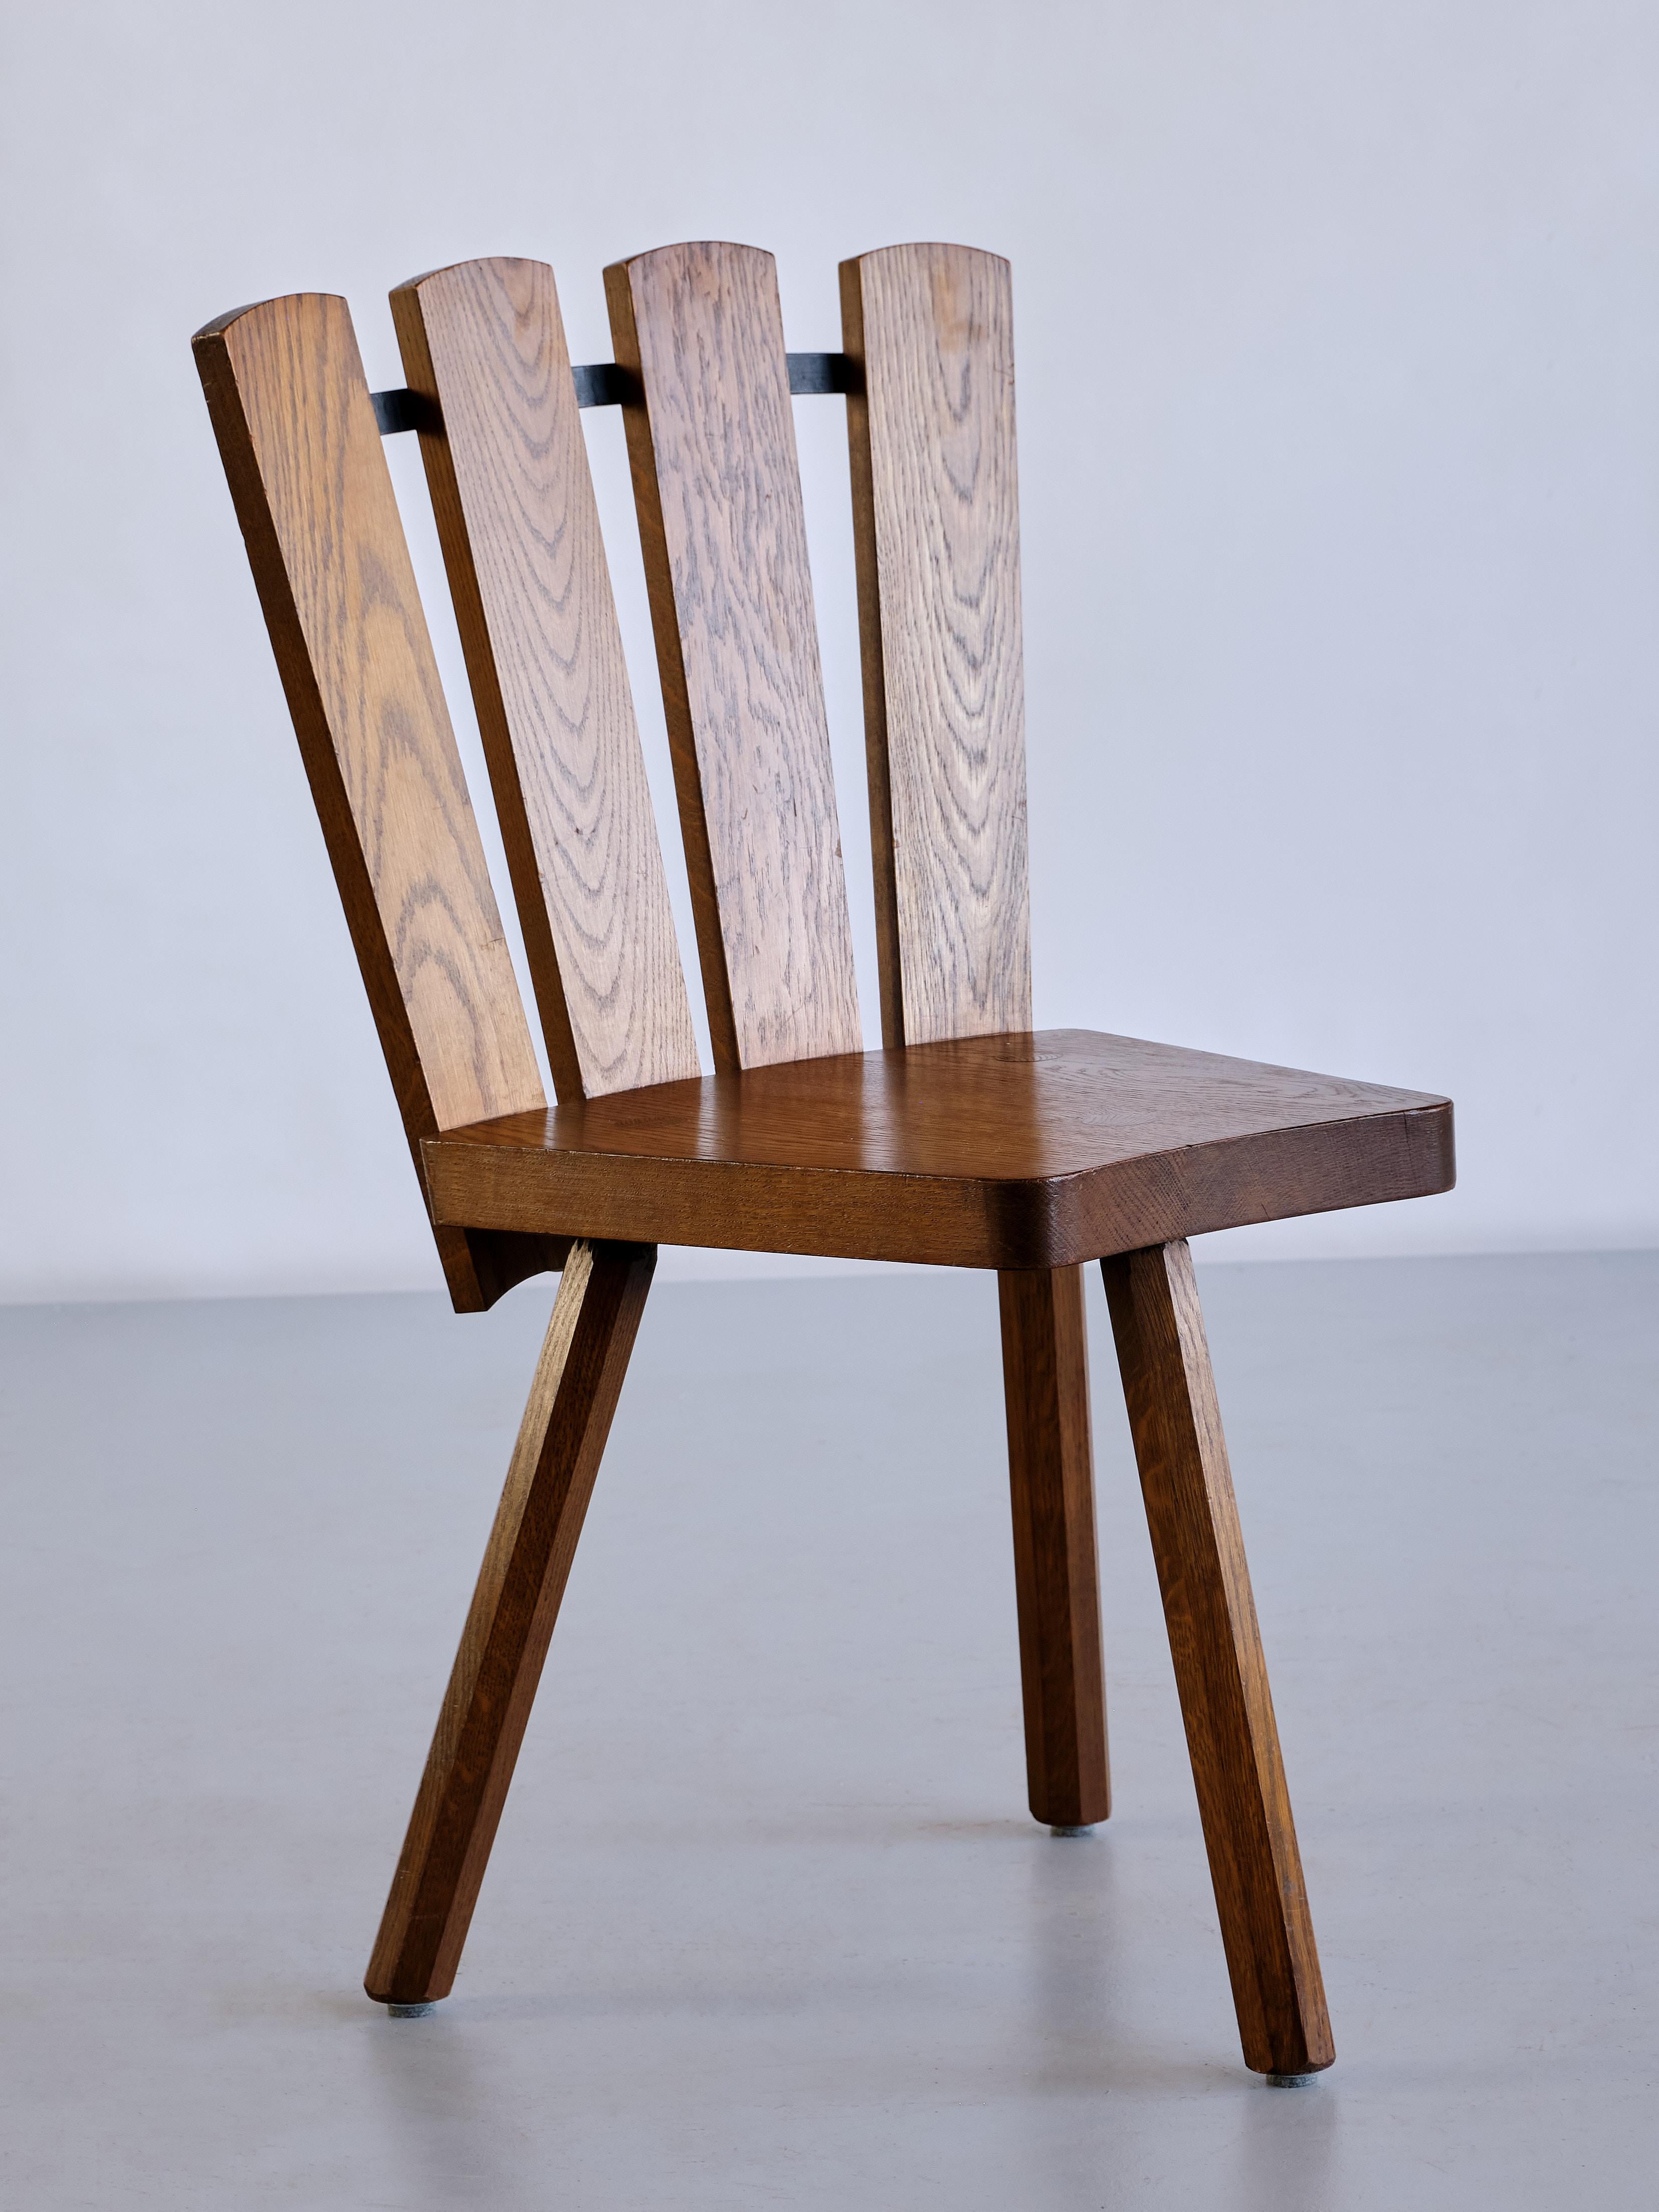 Set of Four French Modern Tripod Oak Dining Chairs with Fan Shaped Back, 1950s For Sale 3